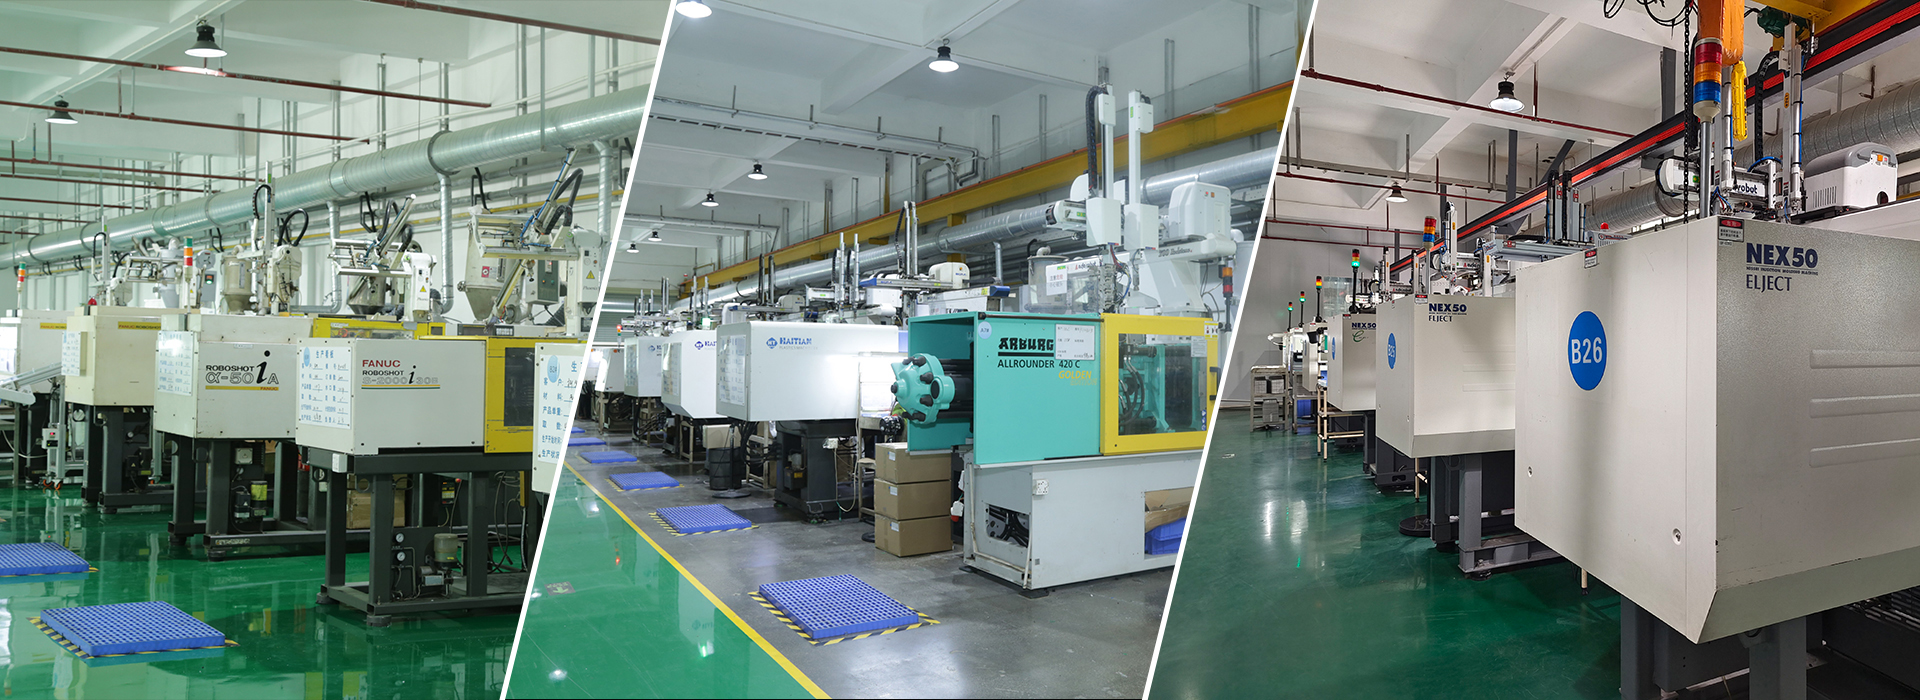 Dongguan Forwa Precision Industrial Technology Co., Ltd